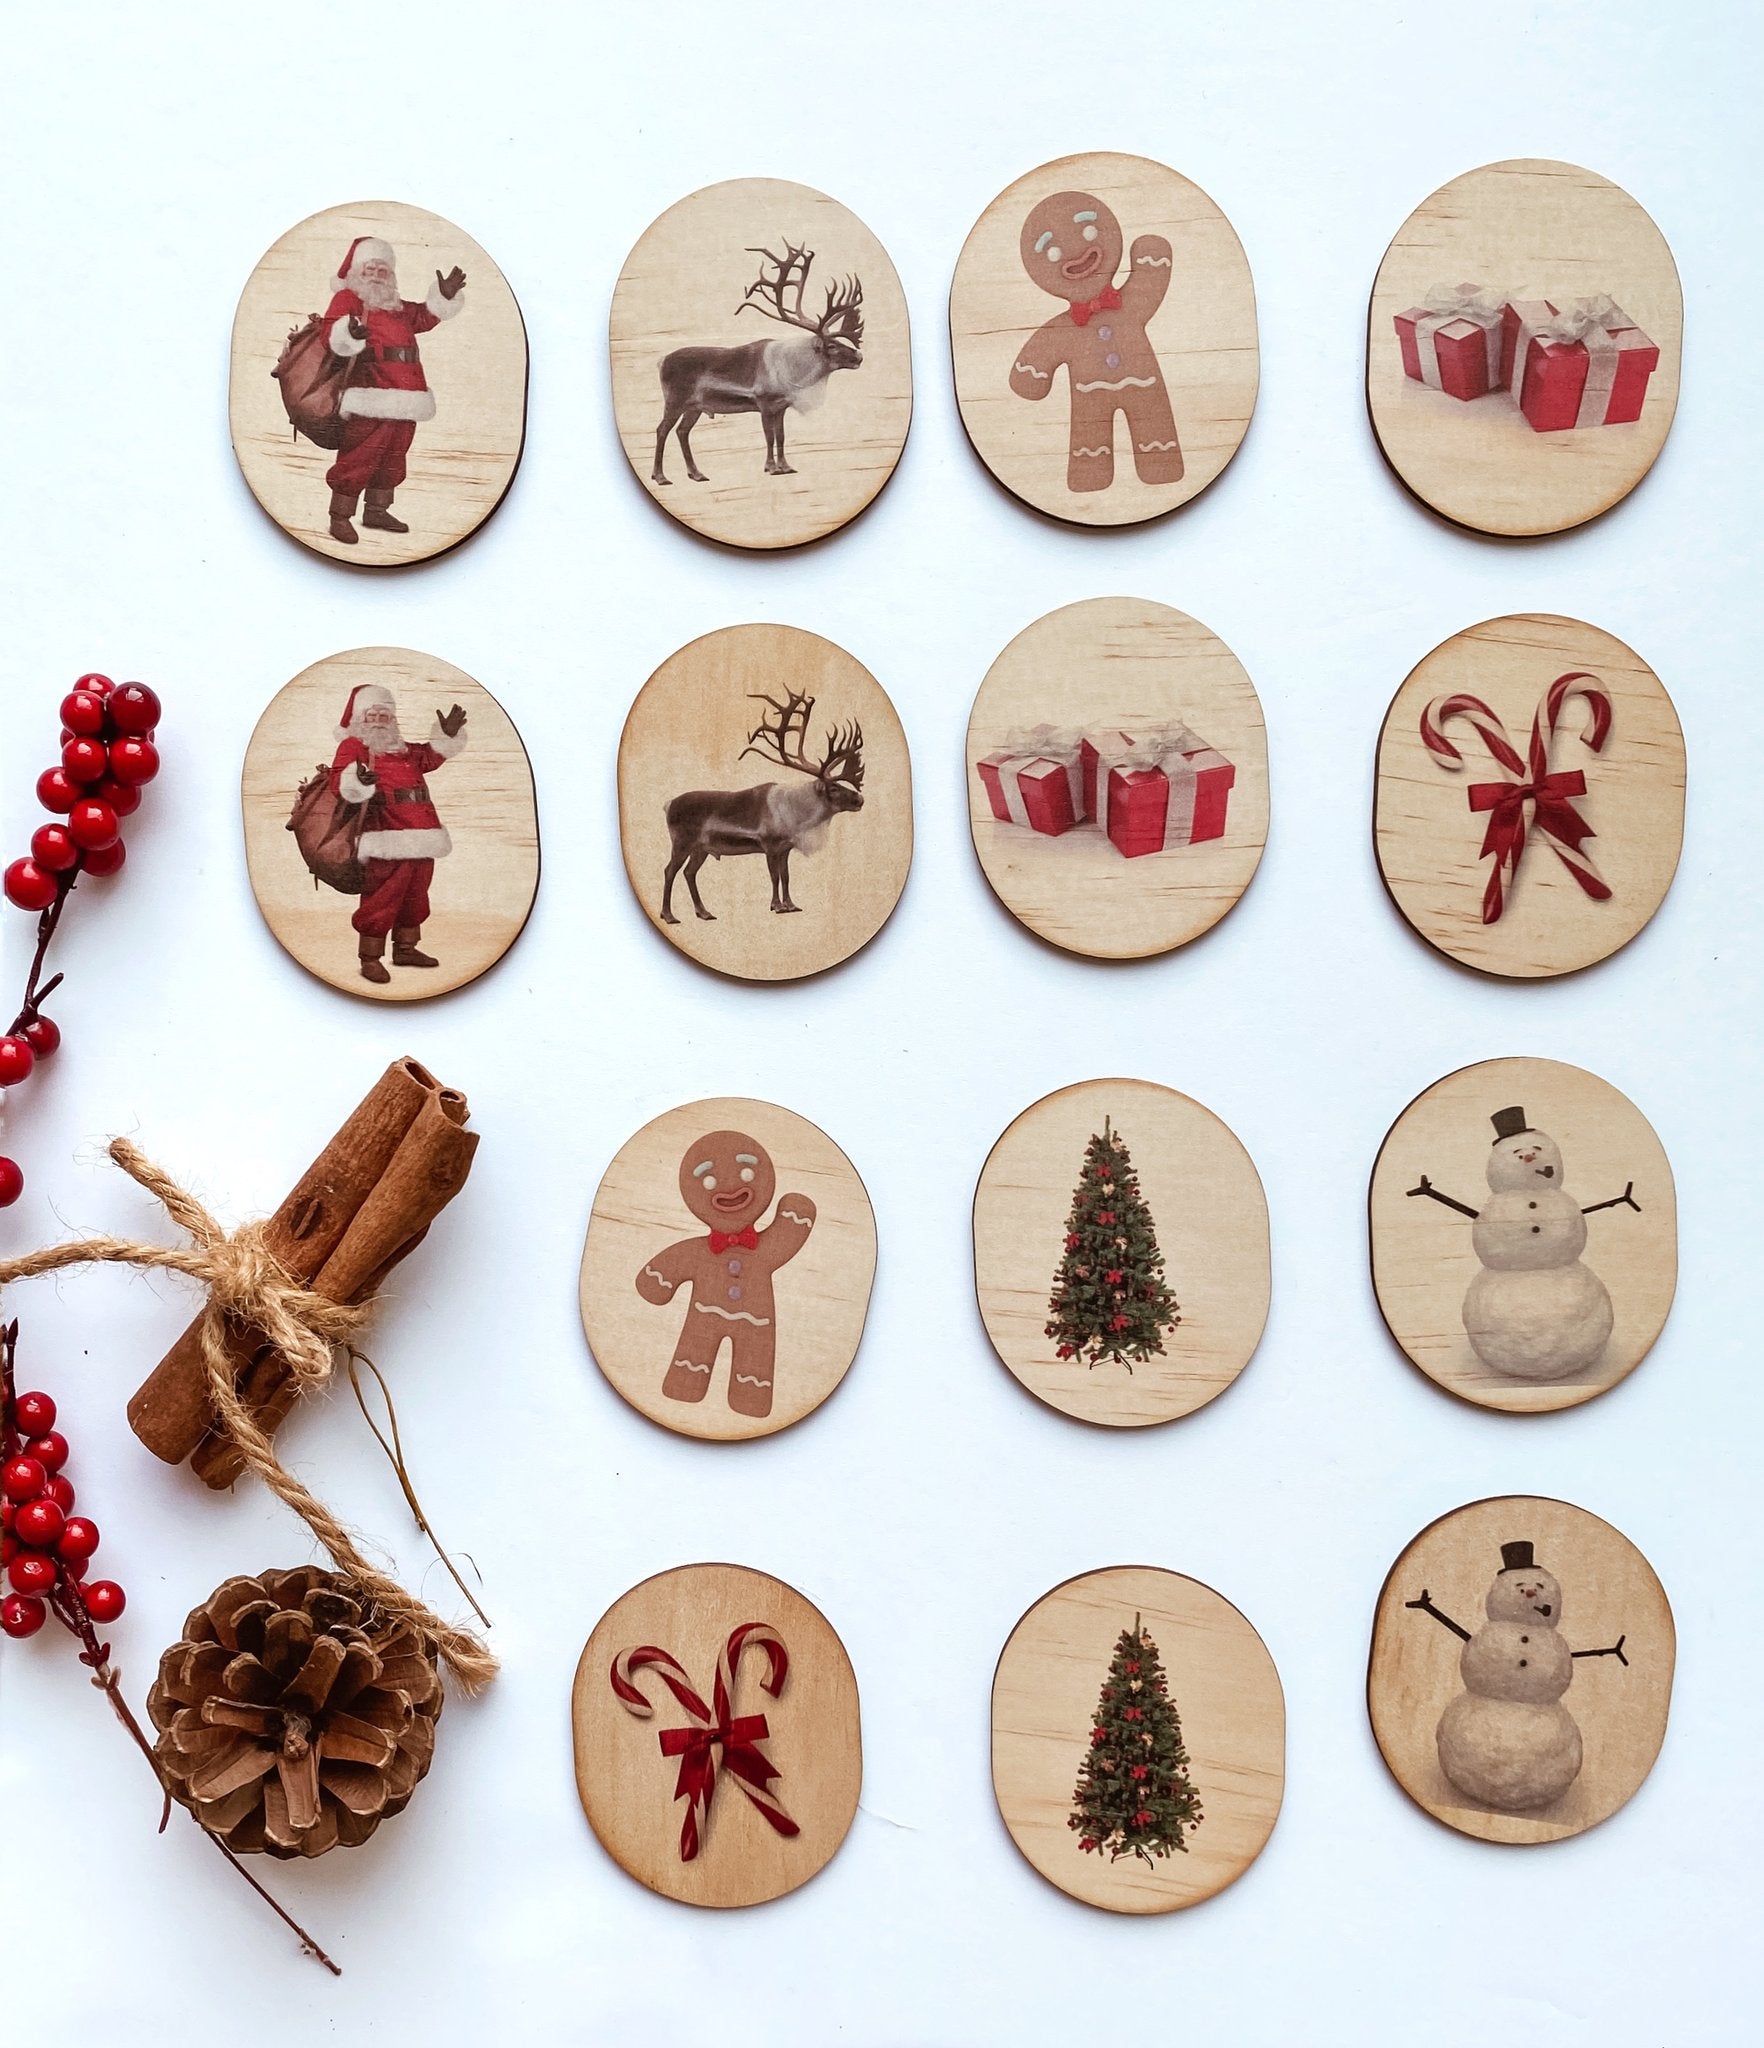 5 Little Bears | Christmas Memory Game - 14 Pieces